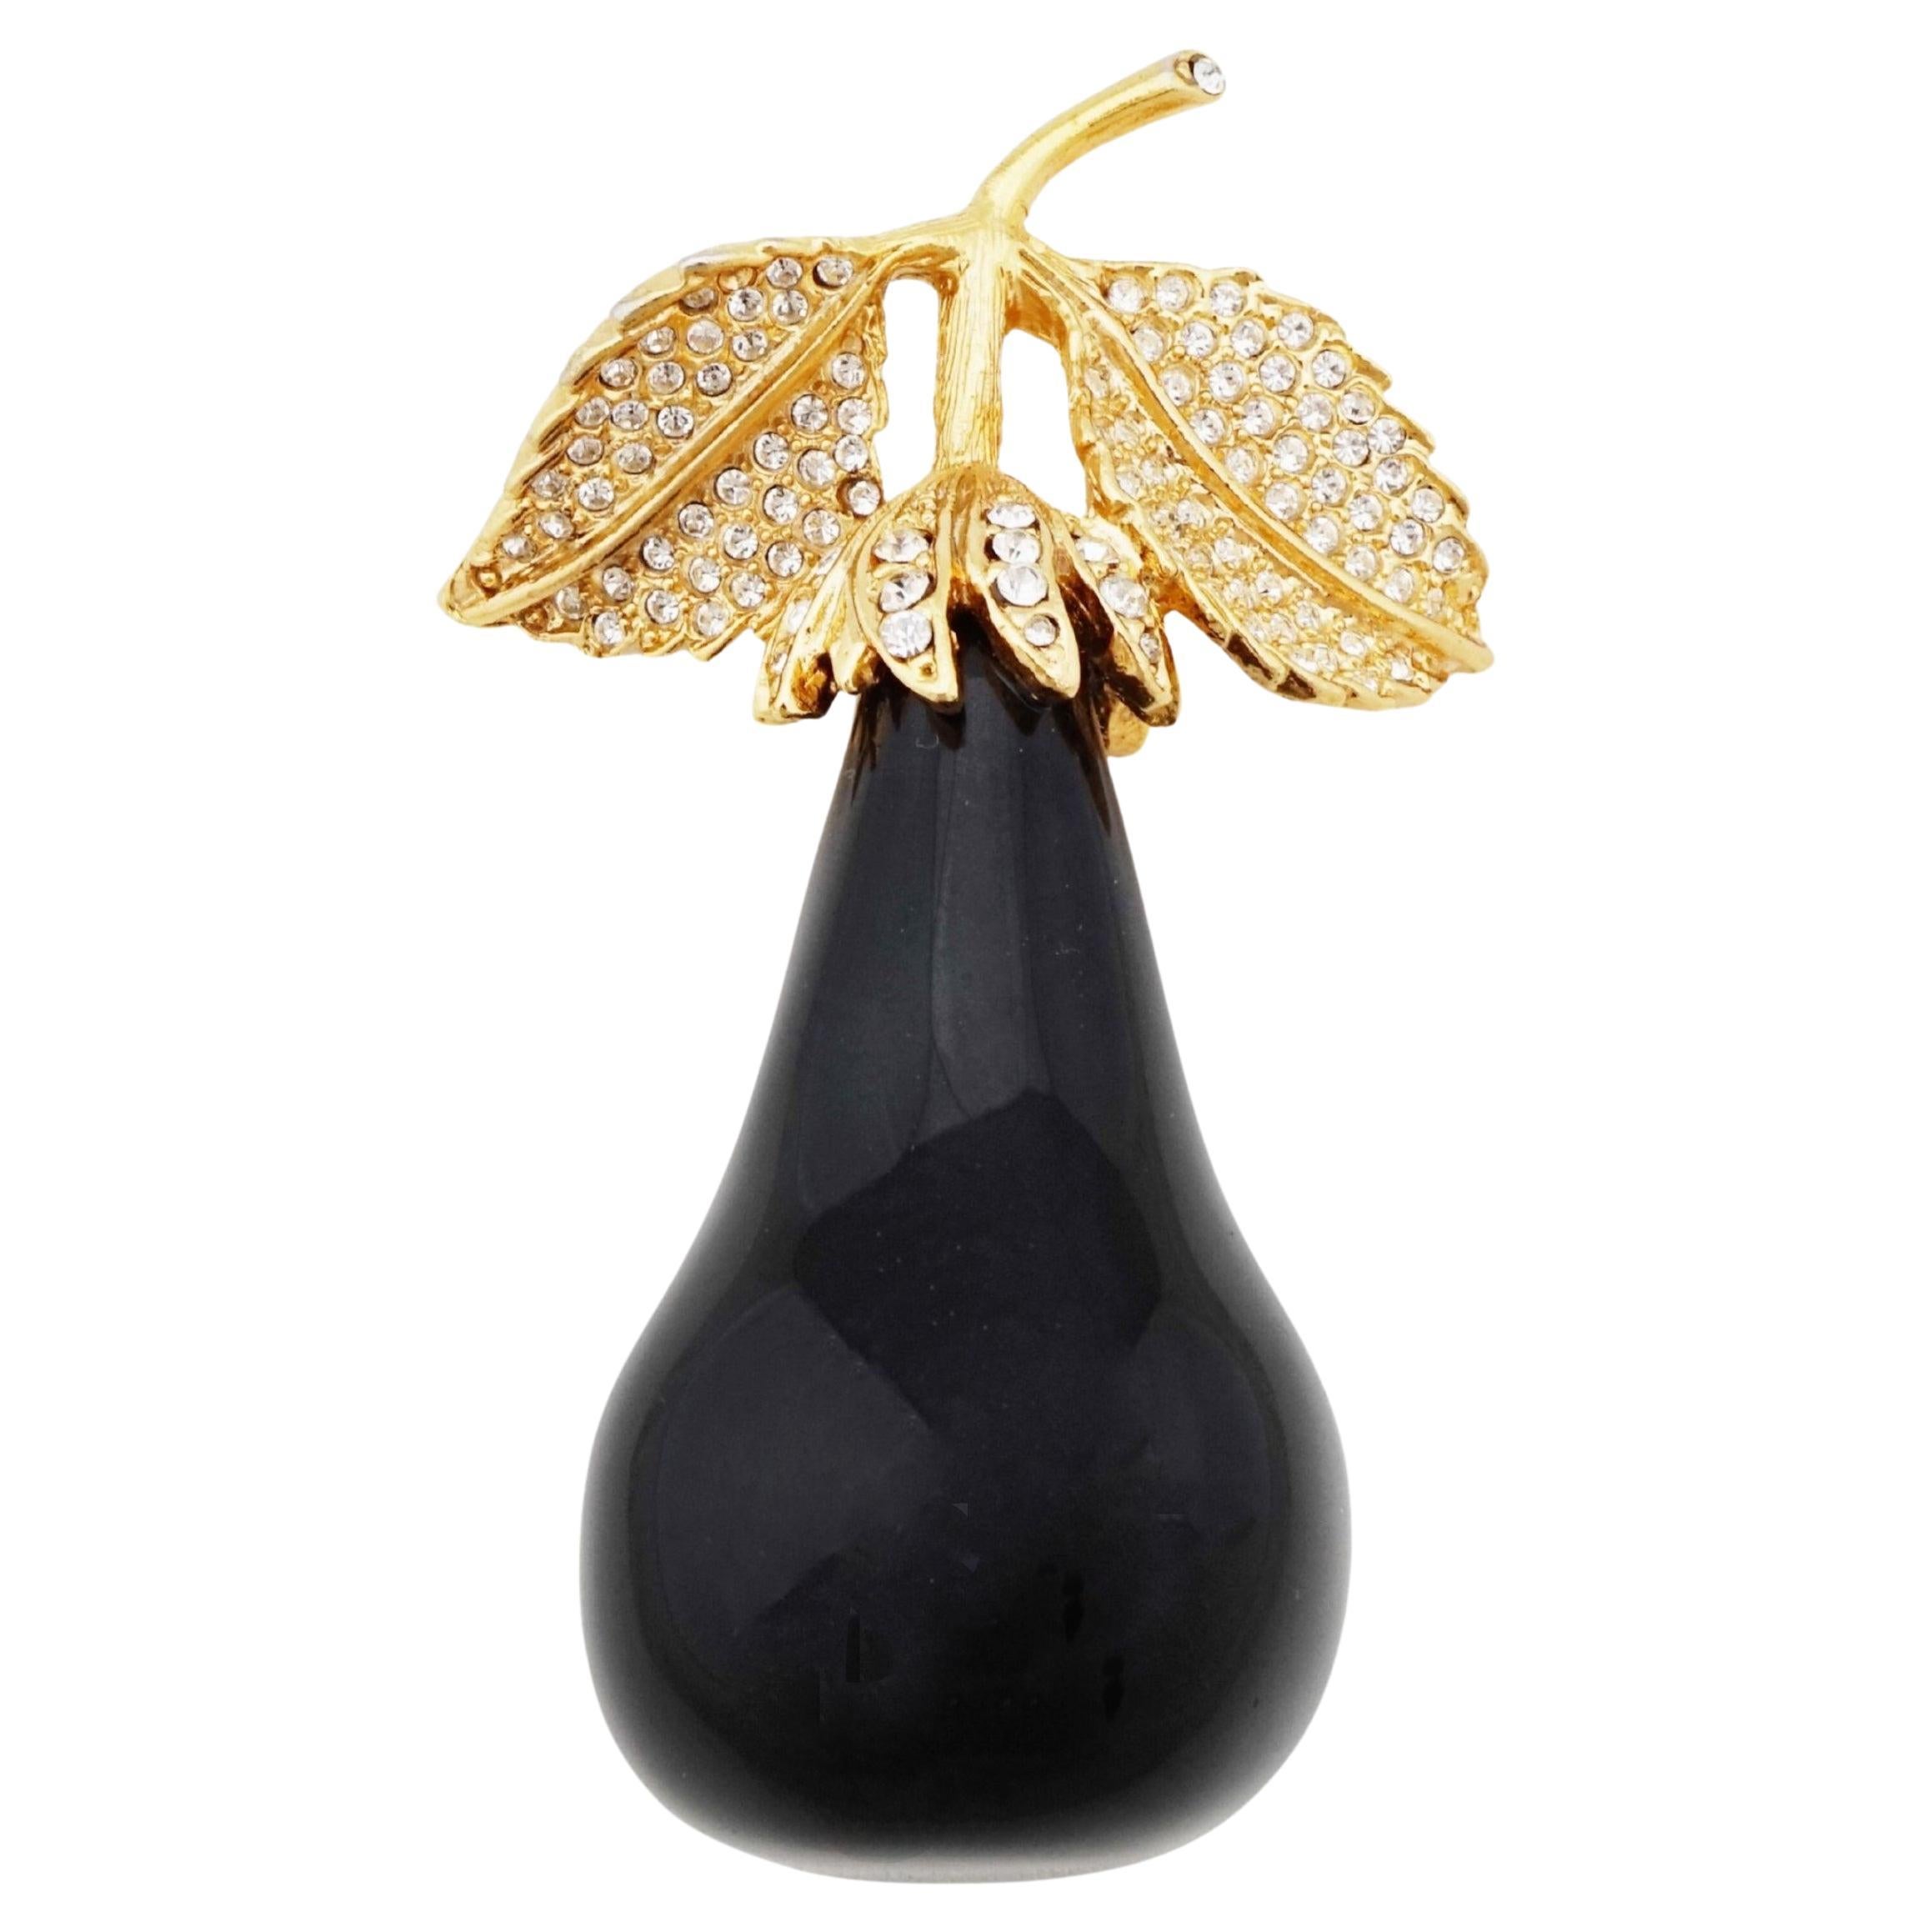 Black Lucite Pear Brooch With Rhinestone Details By Kenneth Jay Lane, 1990s